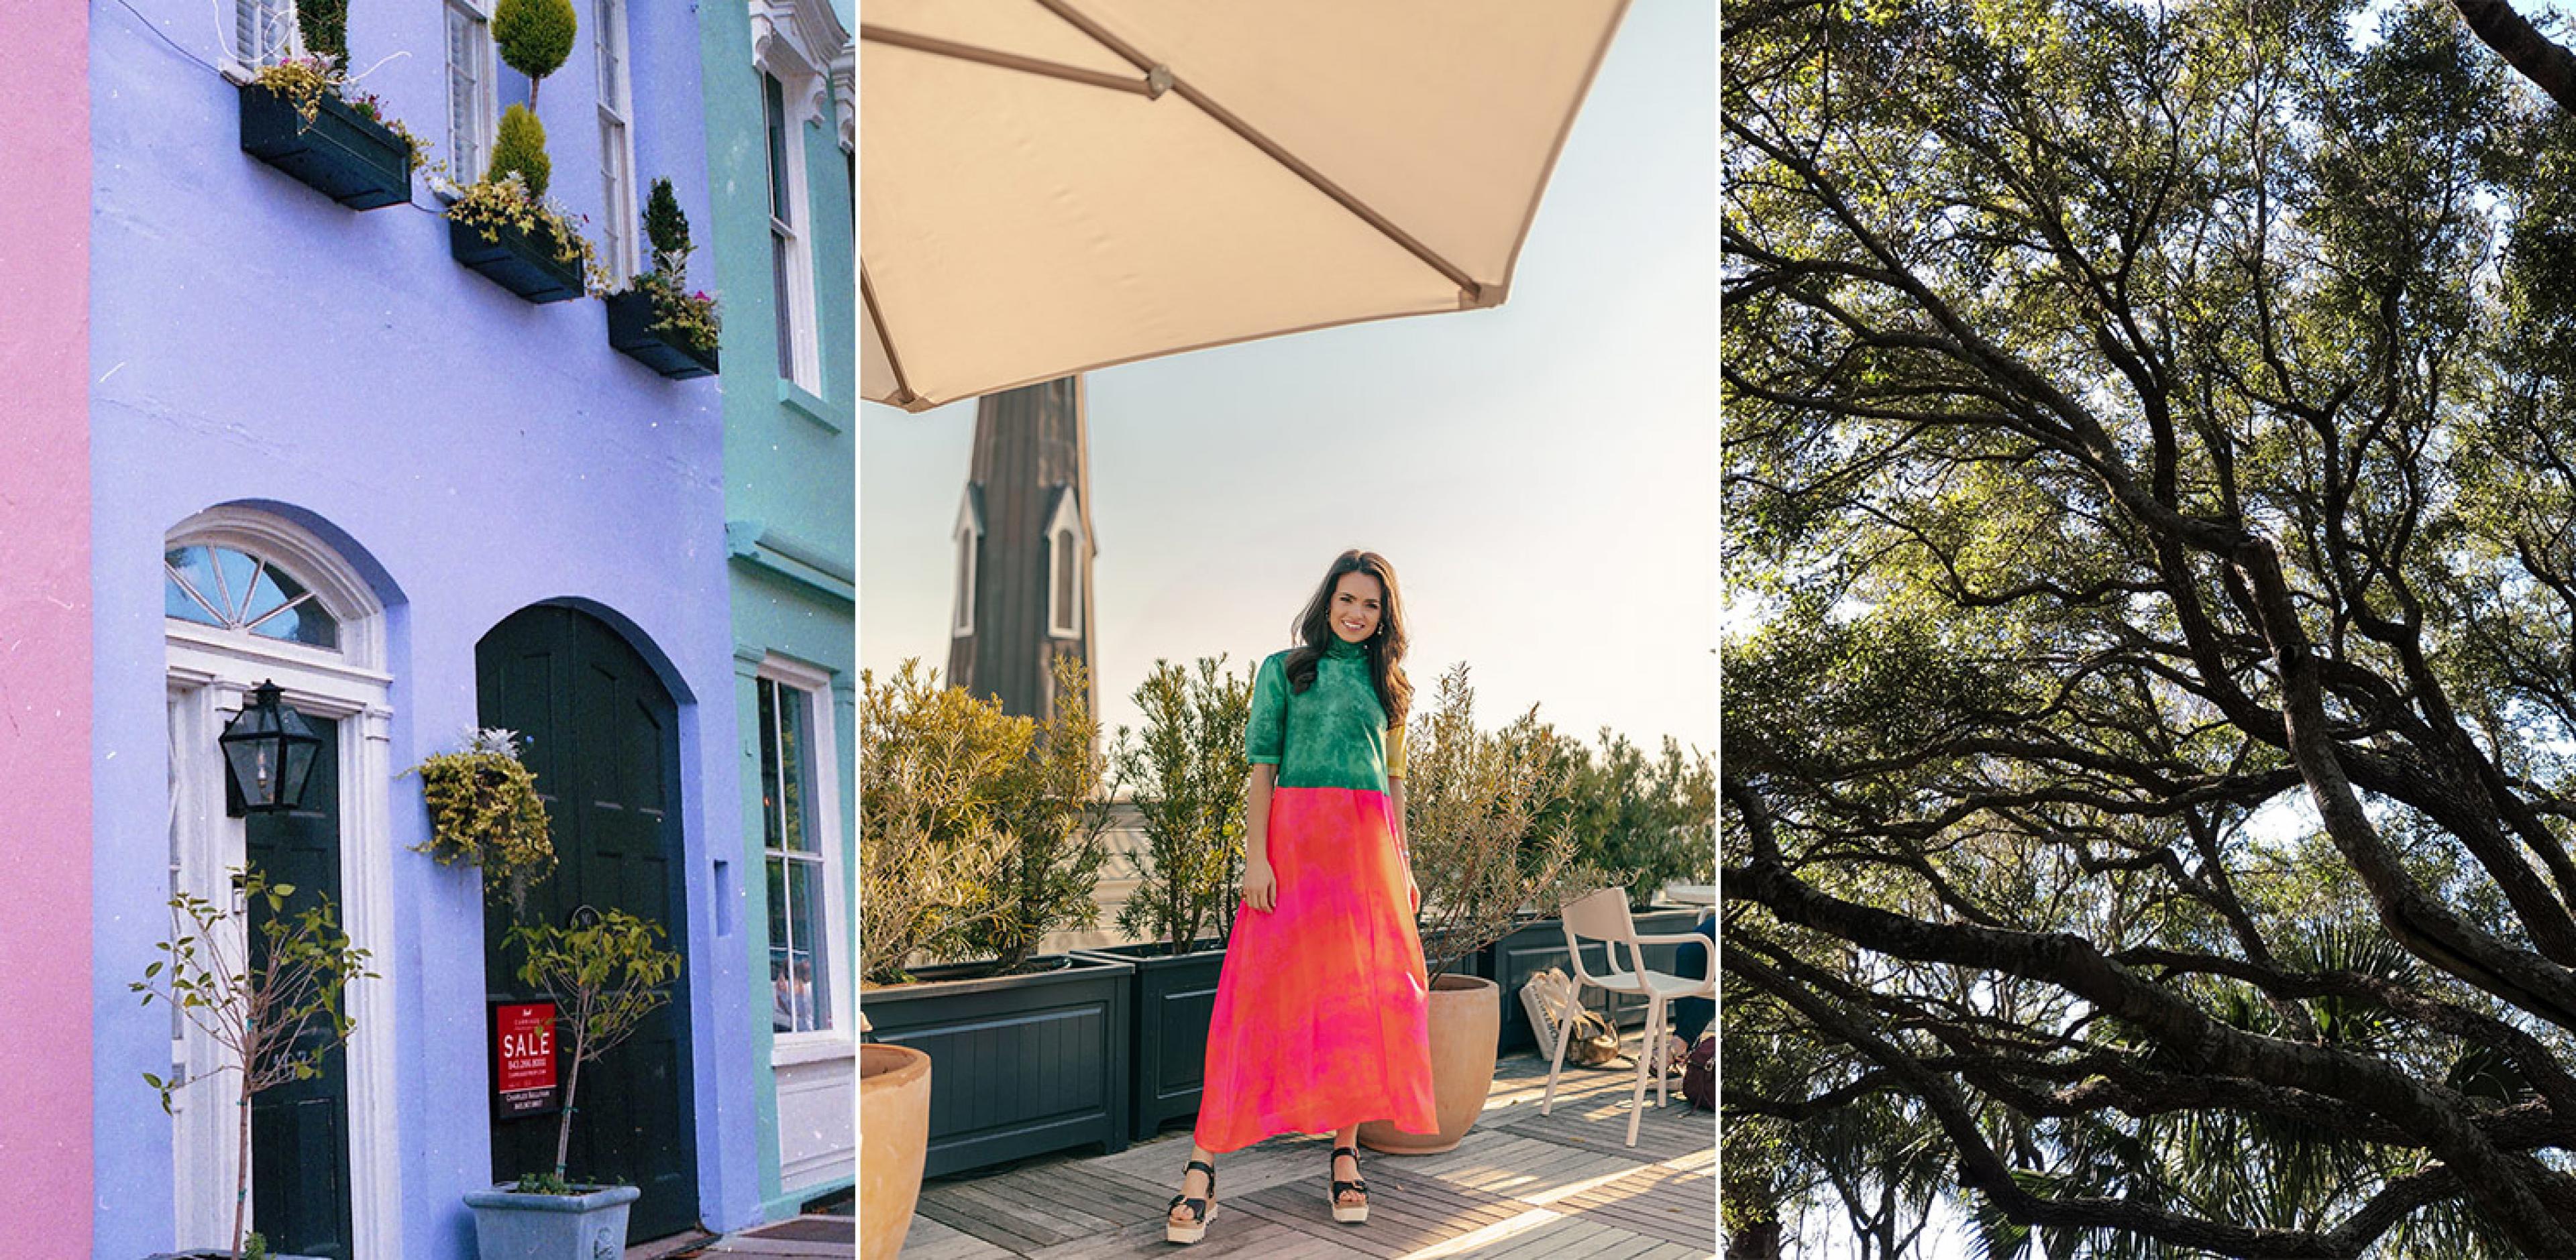 three photos showing 2 scenes of charleston (row houses + oak trees) with a woman in a dress on a rooftop in between 